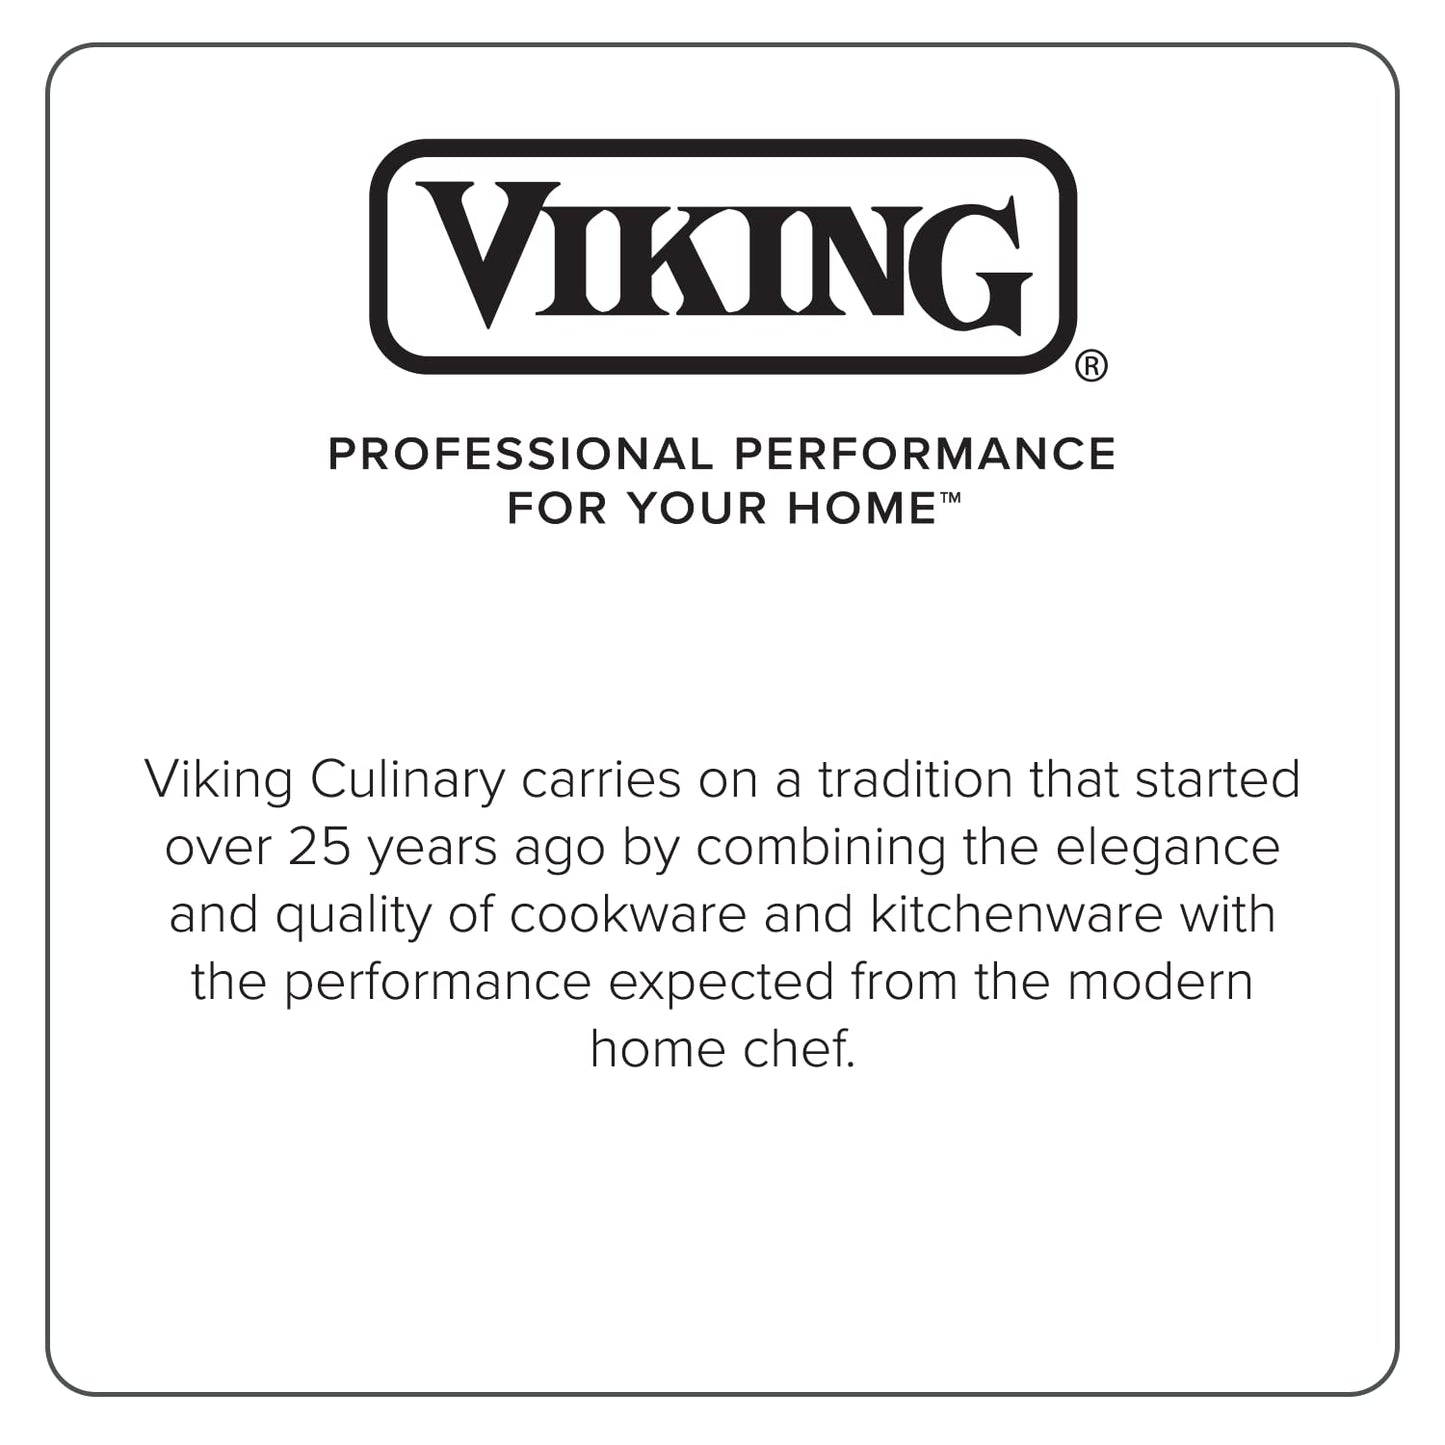 Viking Culinary 3-Ply Stainless Steel Pasta Pot, 8 Quart, Includes Pasta & Steamer Insert, Dishwasher, Oven Safe, Works on All Cooktops including Induction